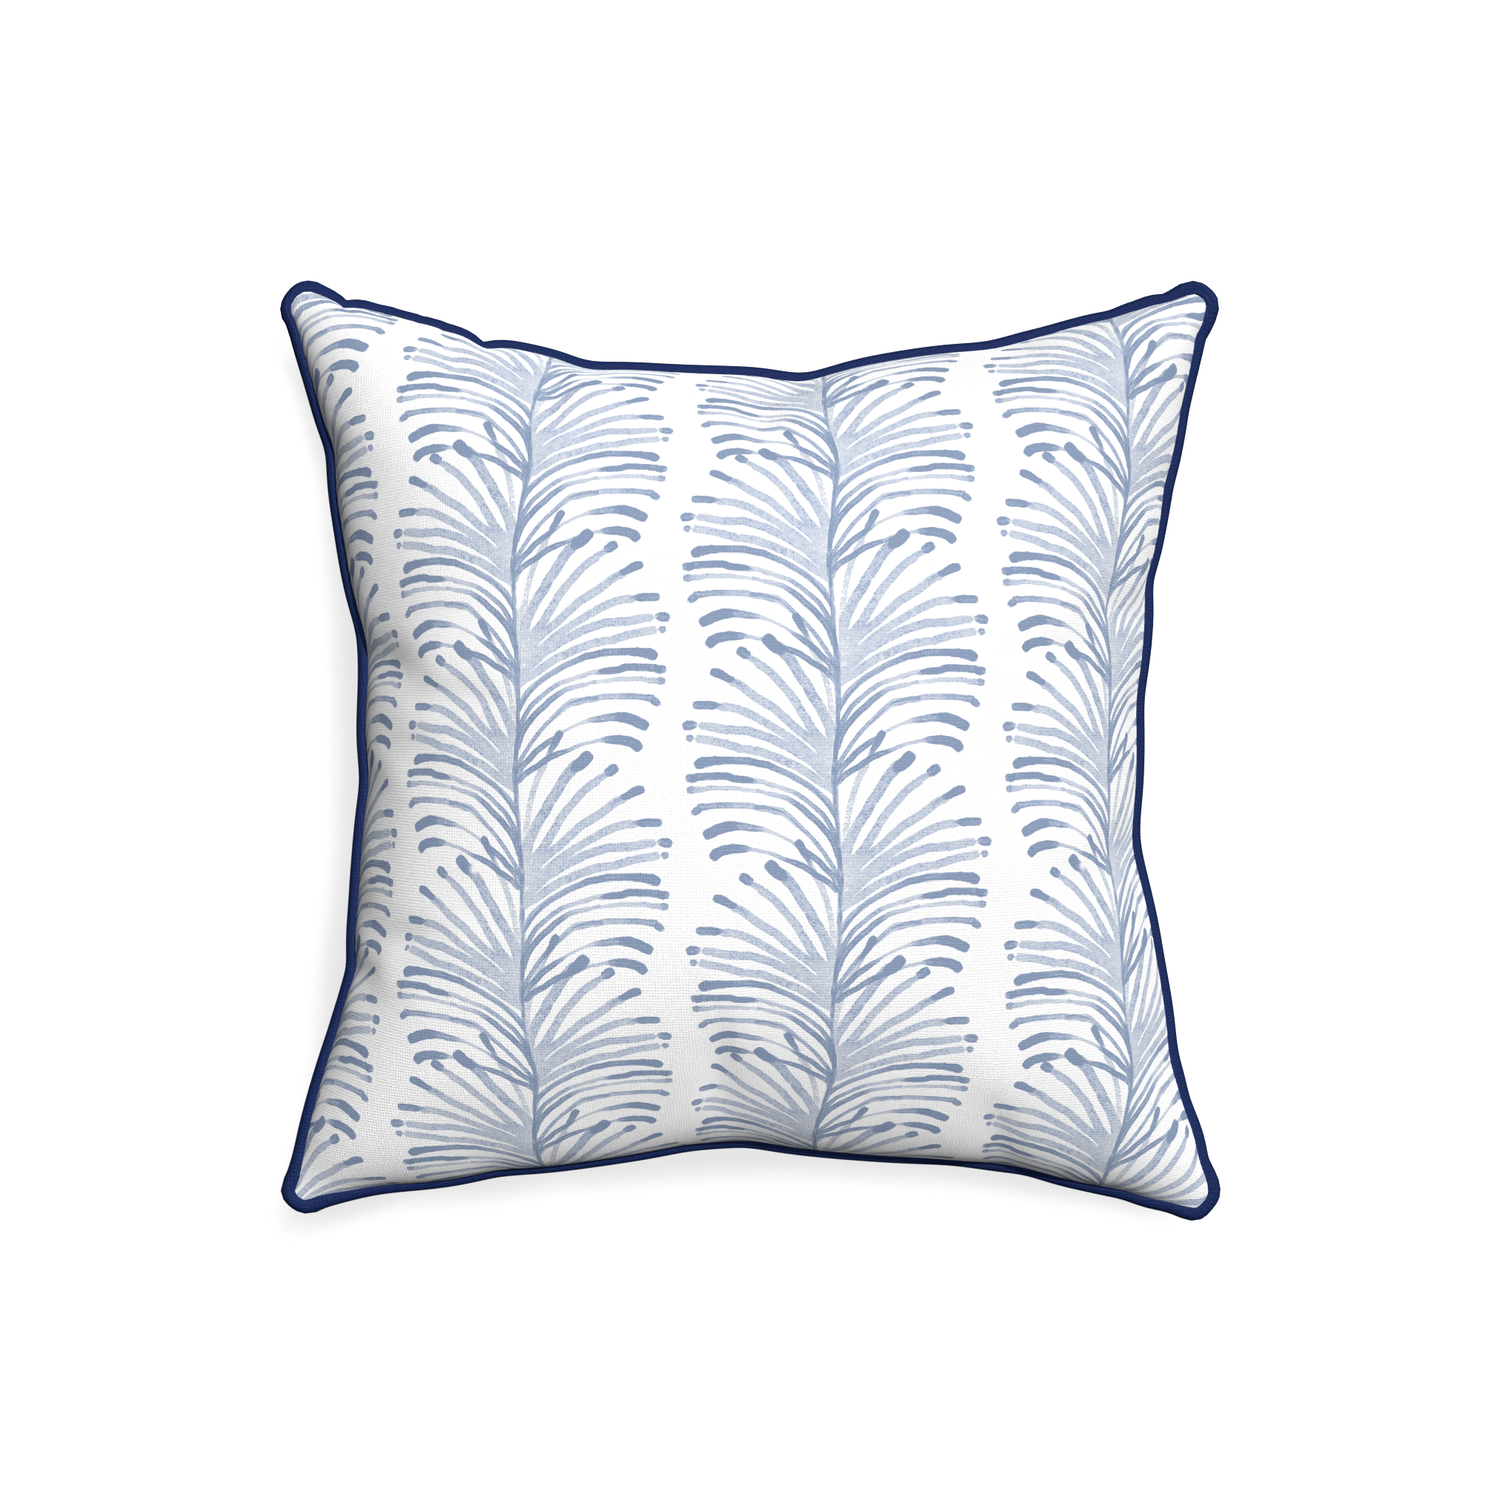 20-square emma sky custom sky blue botanical stripepillow with midnight piping on white background